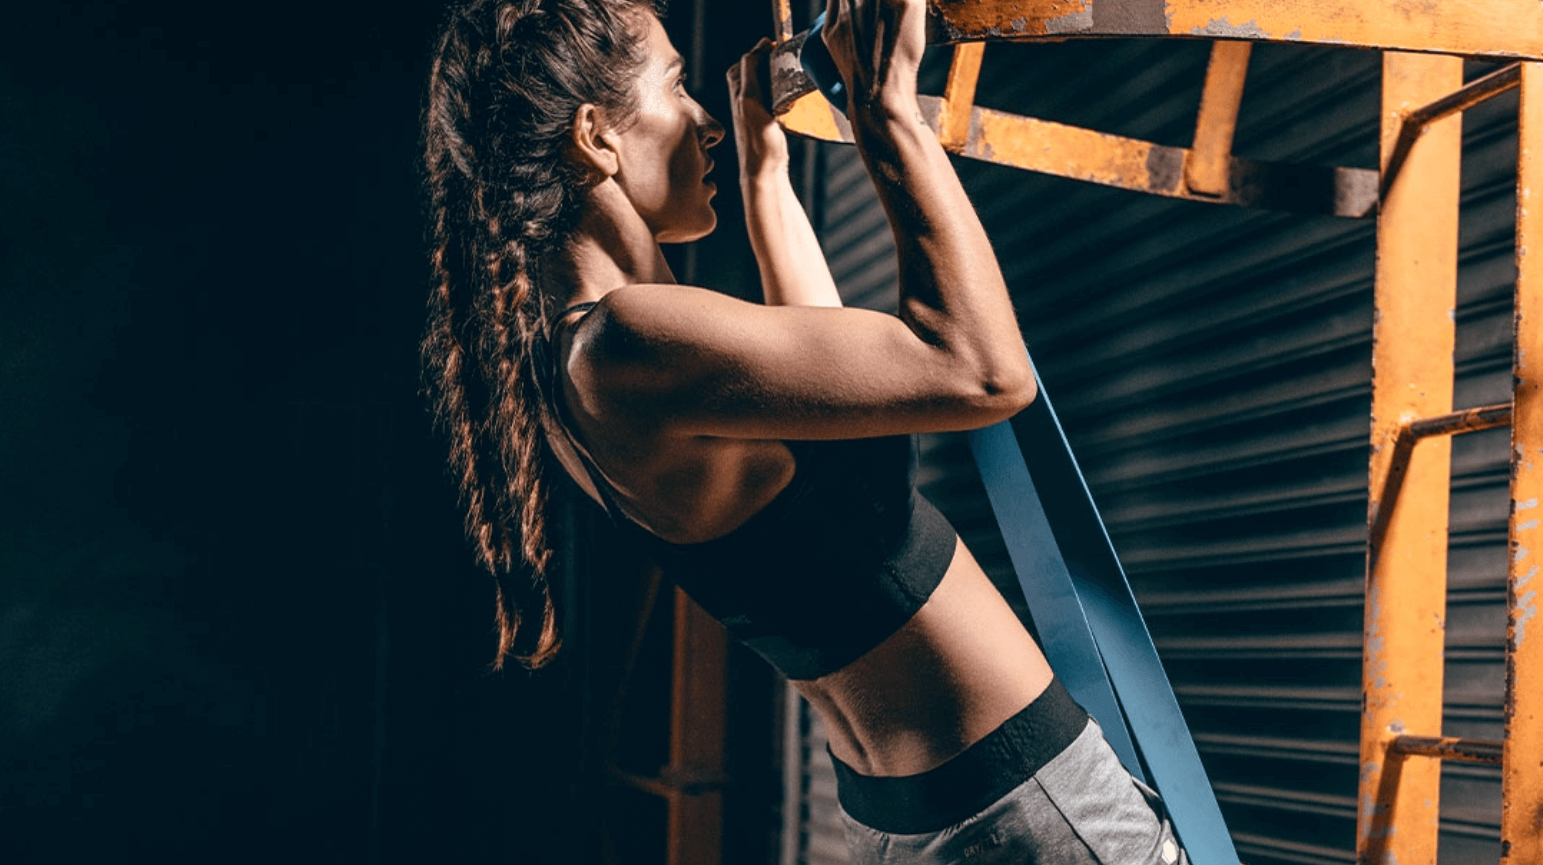 Negative pull ups are more challenging than assisted pull ups, and it takes time and efforts